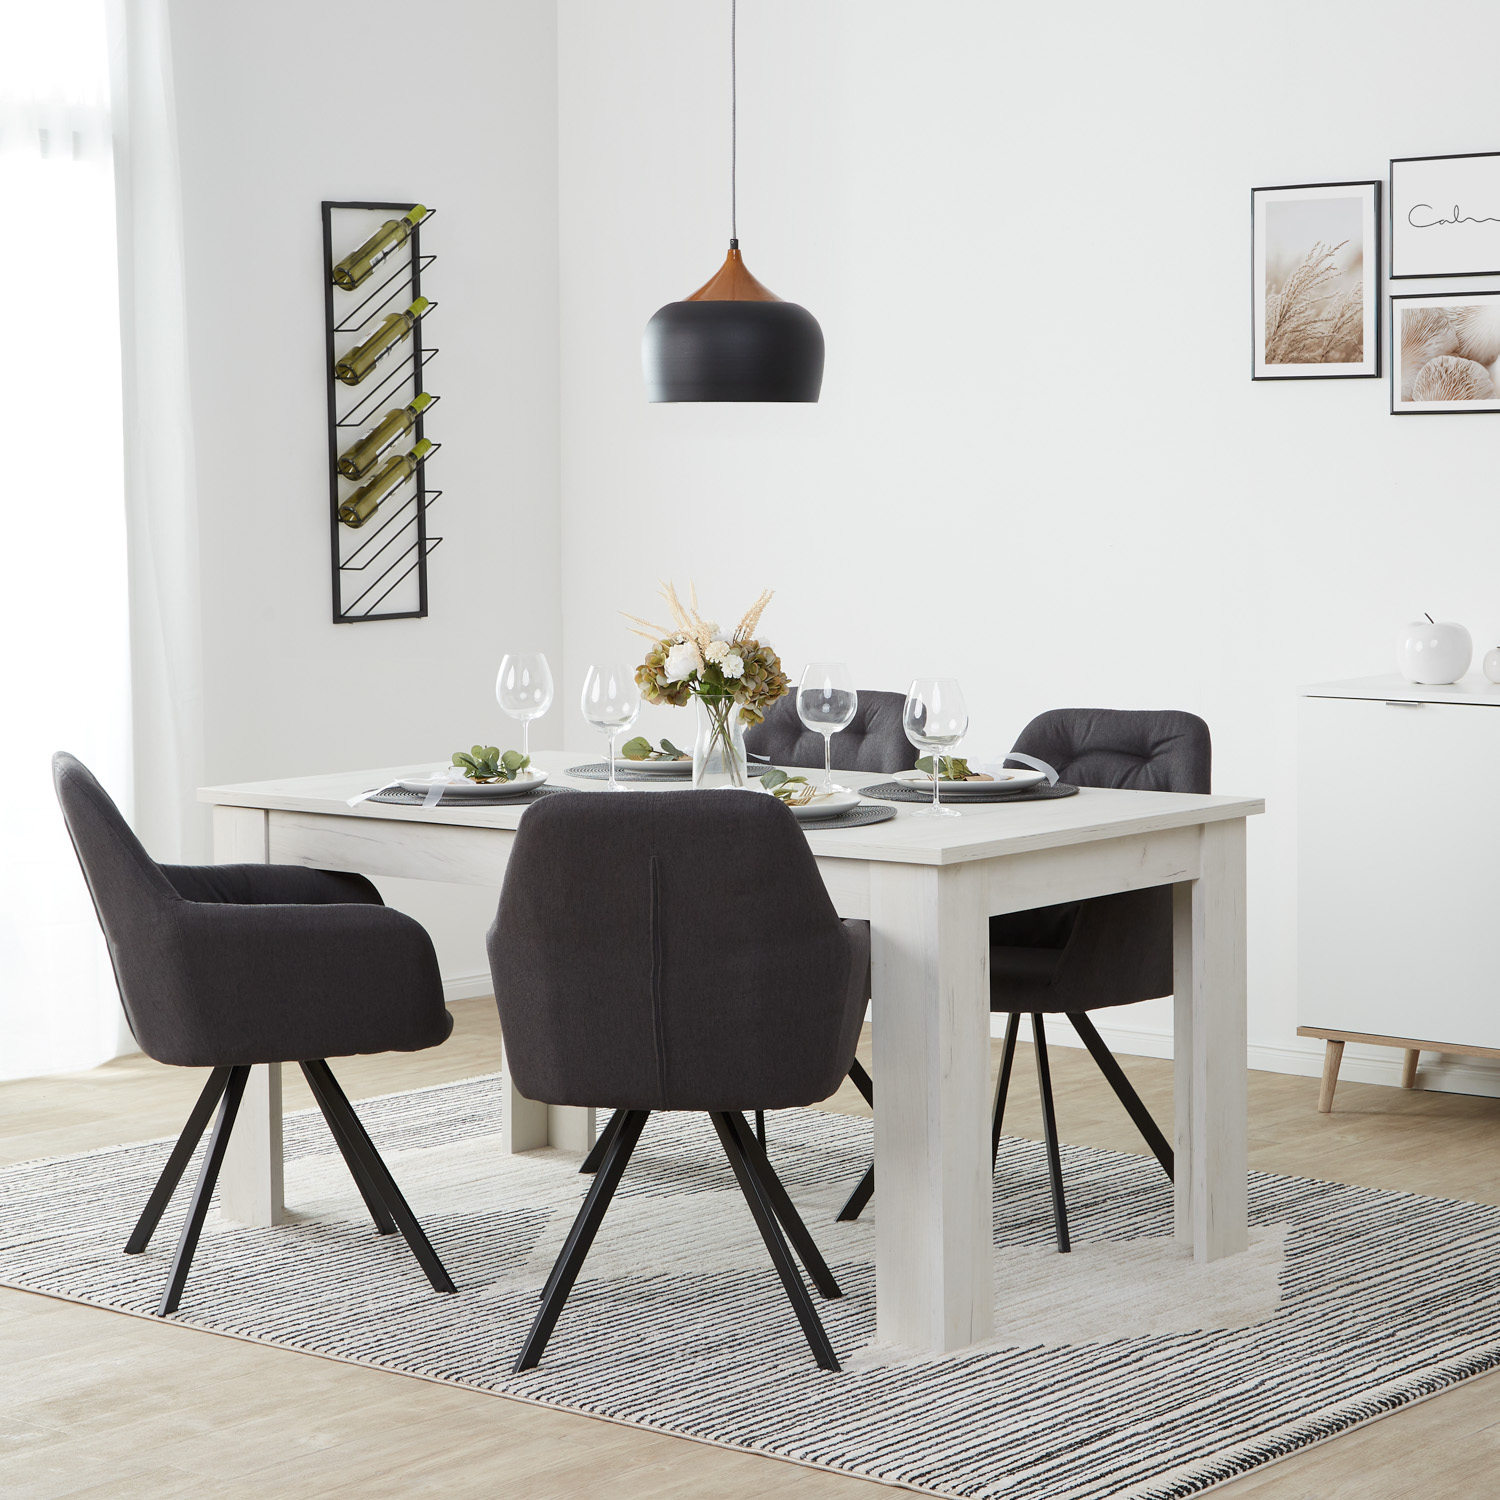 Dining Table 160x90 cm Extendable with 4 Chairs Anthracite Dining Room Table Wooden Table White